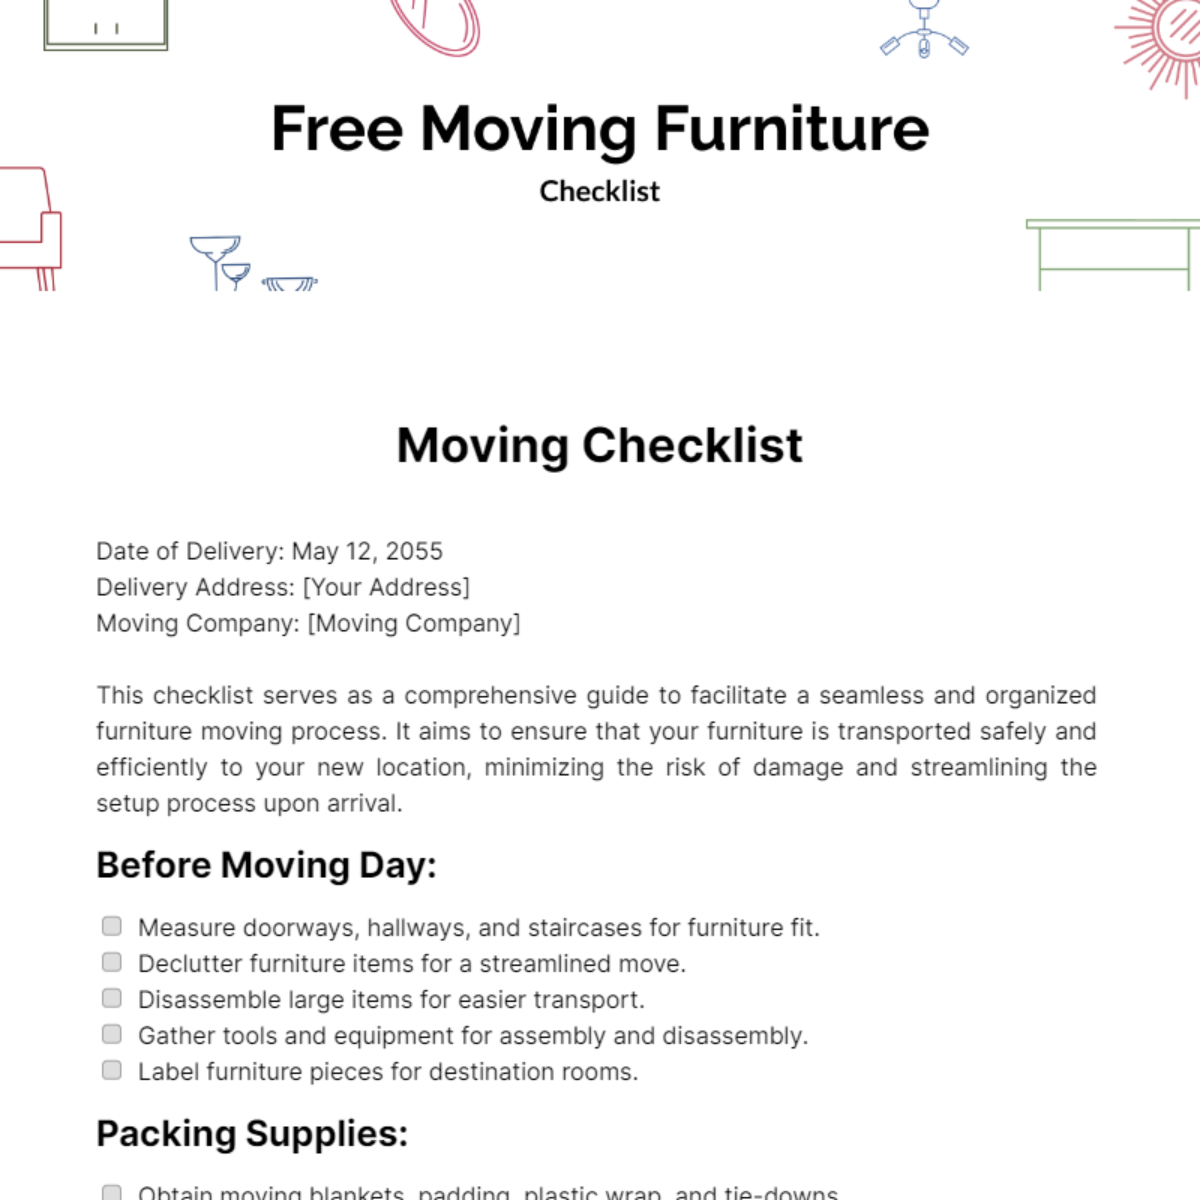 Free Moving Furniture Checklist Template